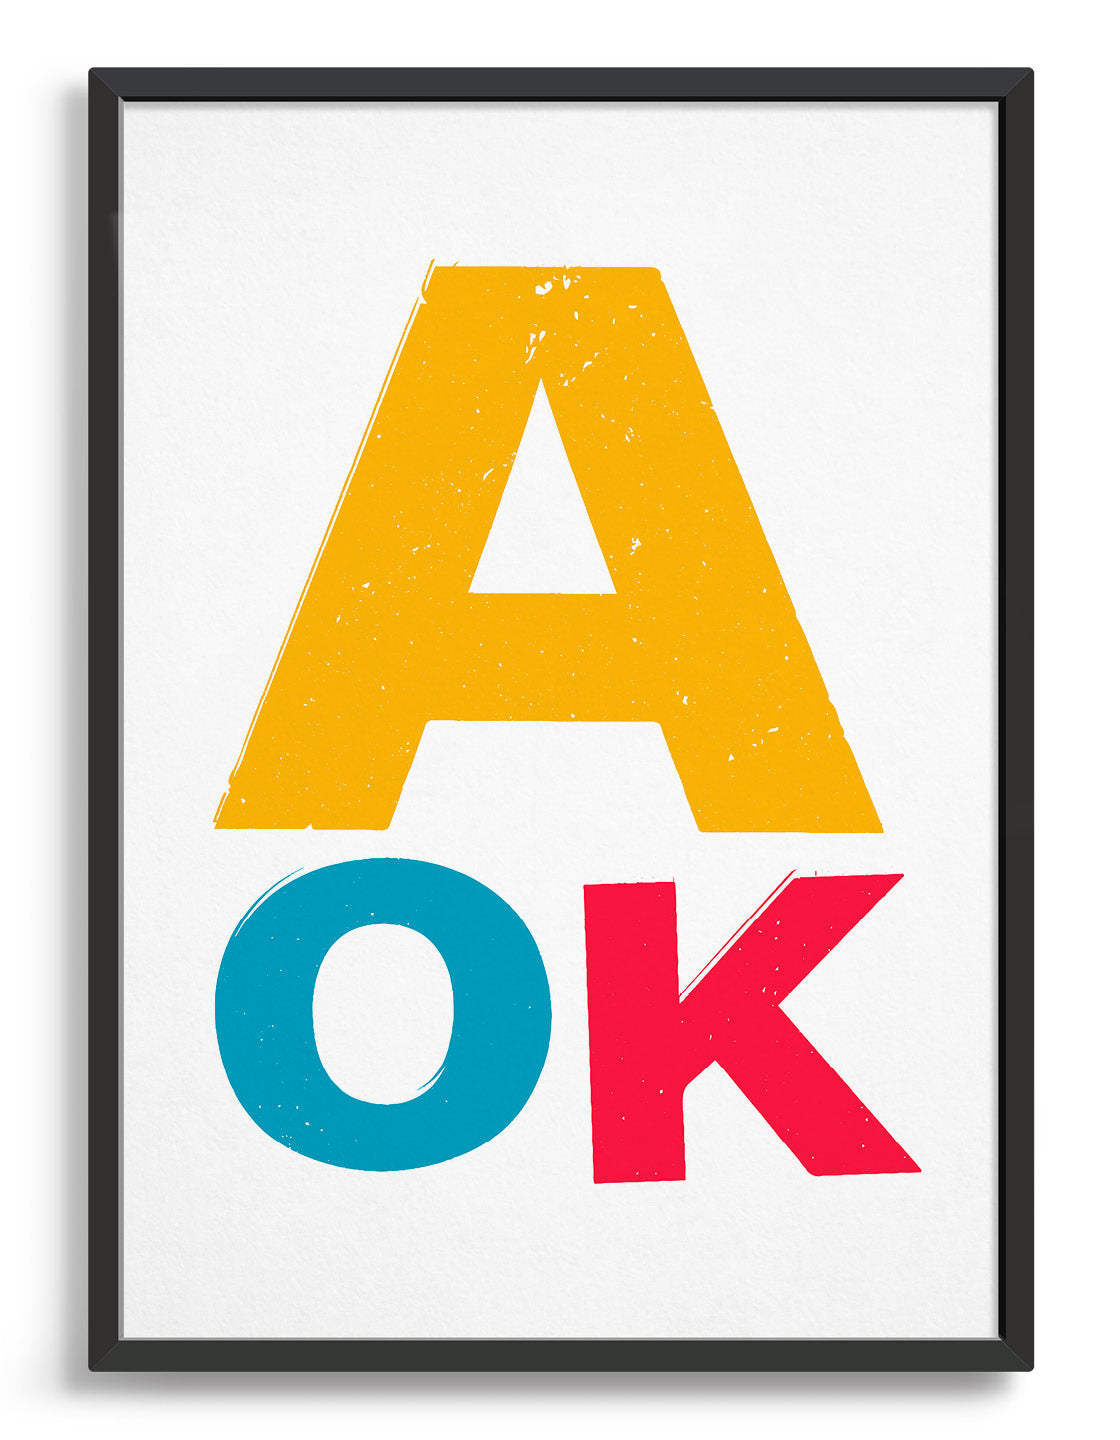 Fun typography print with lettering AOK the A is large and in yellow whilst the o is blue and k is red. This is set against a white background